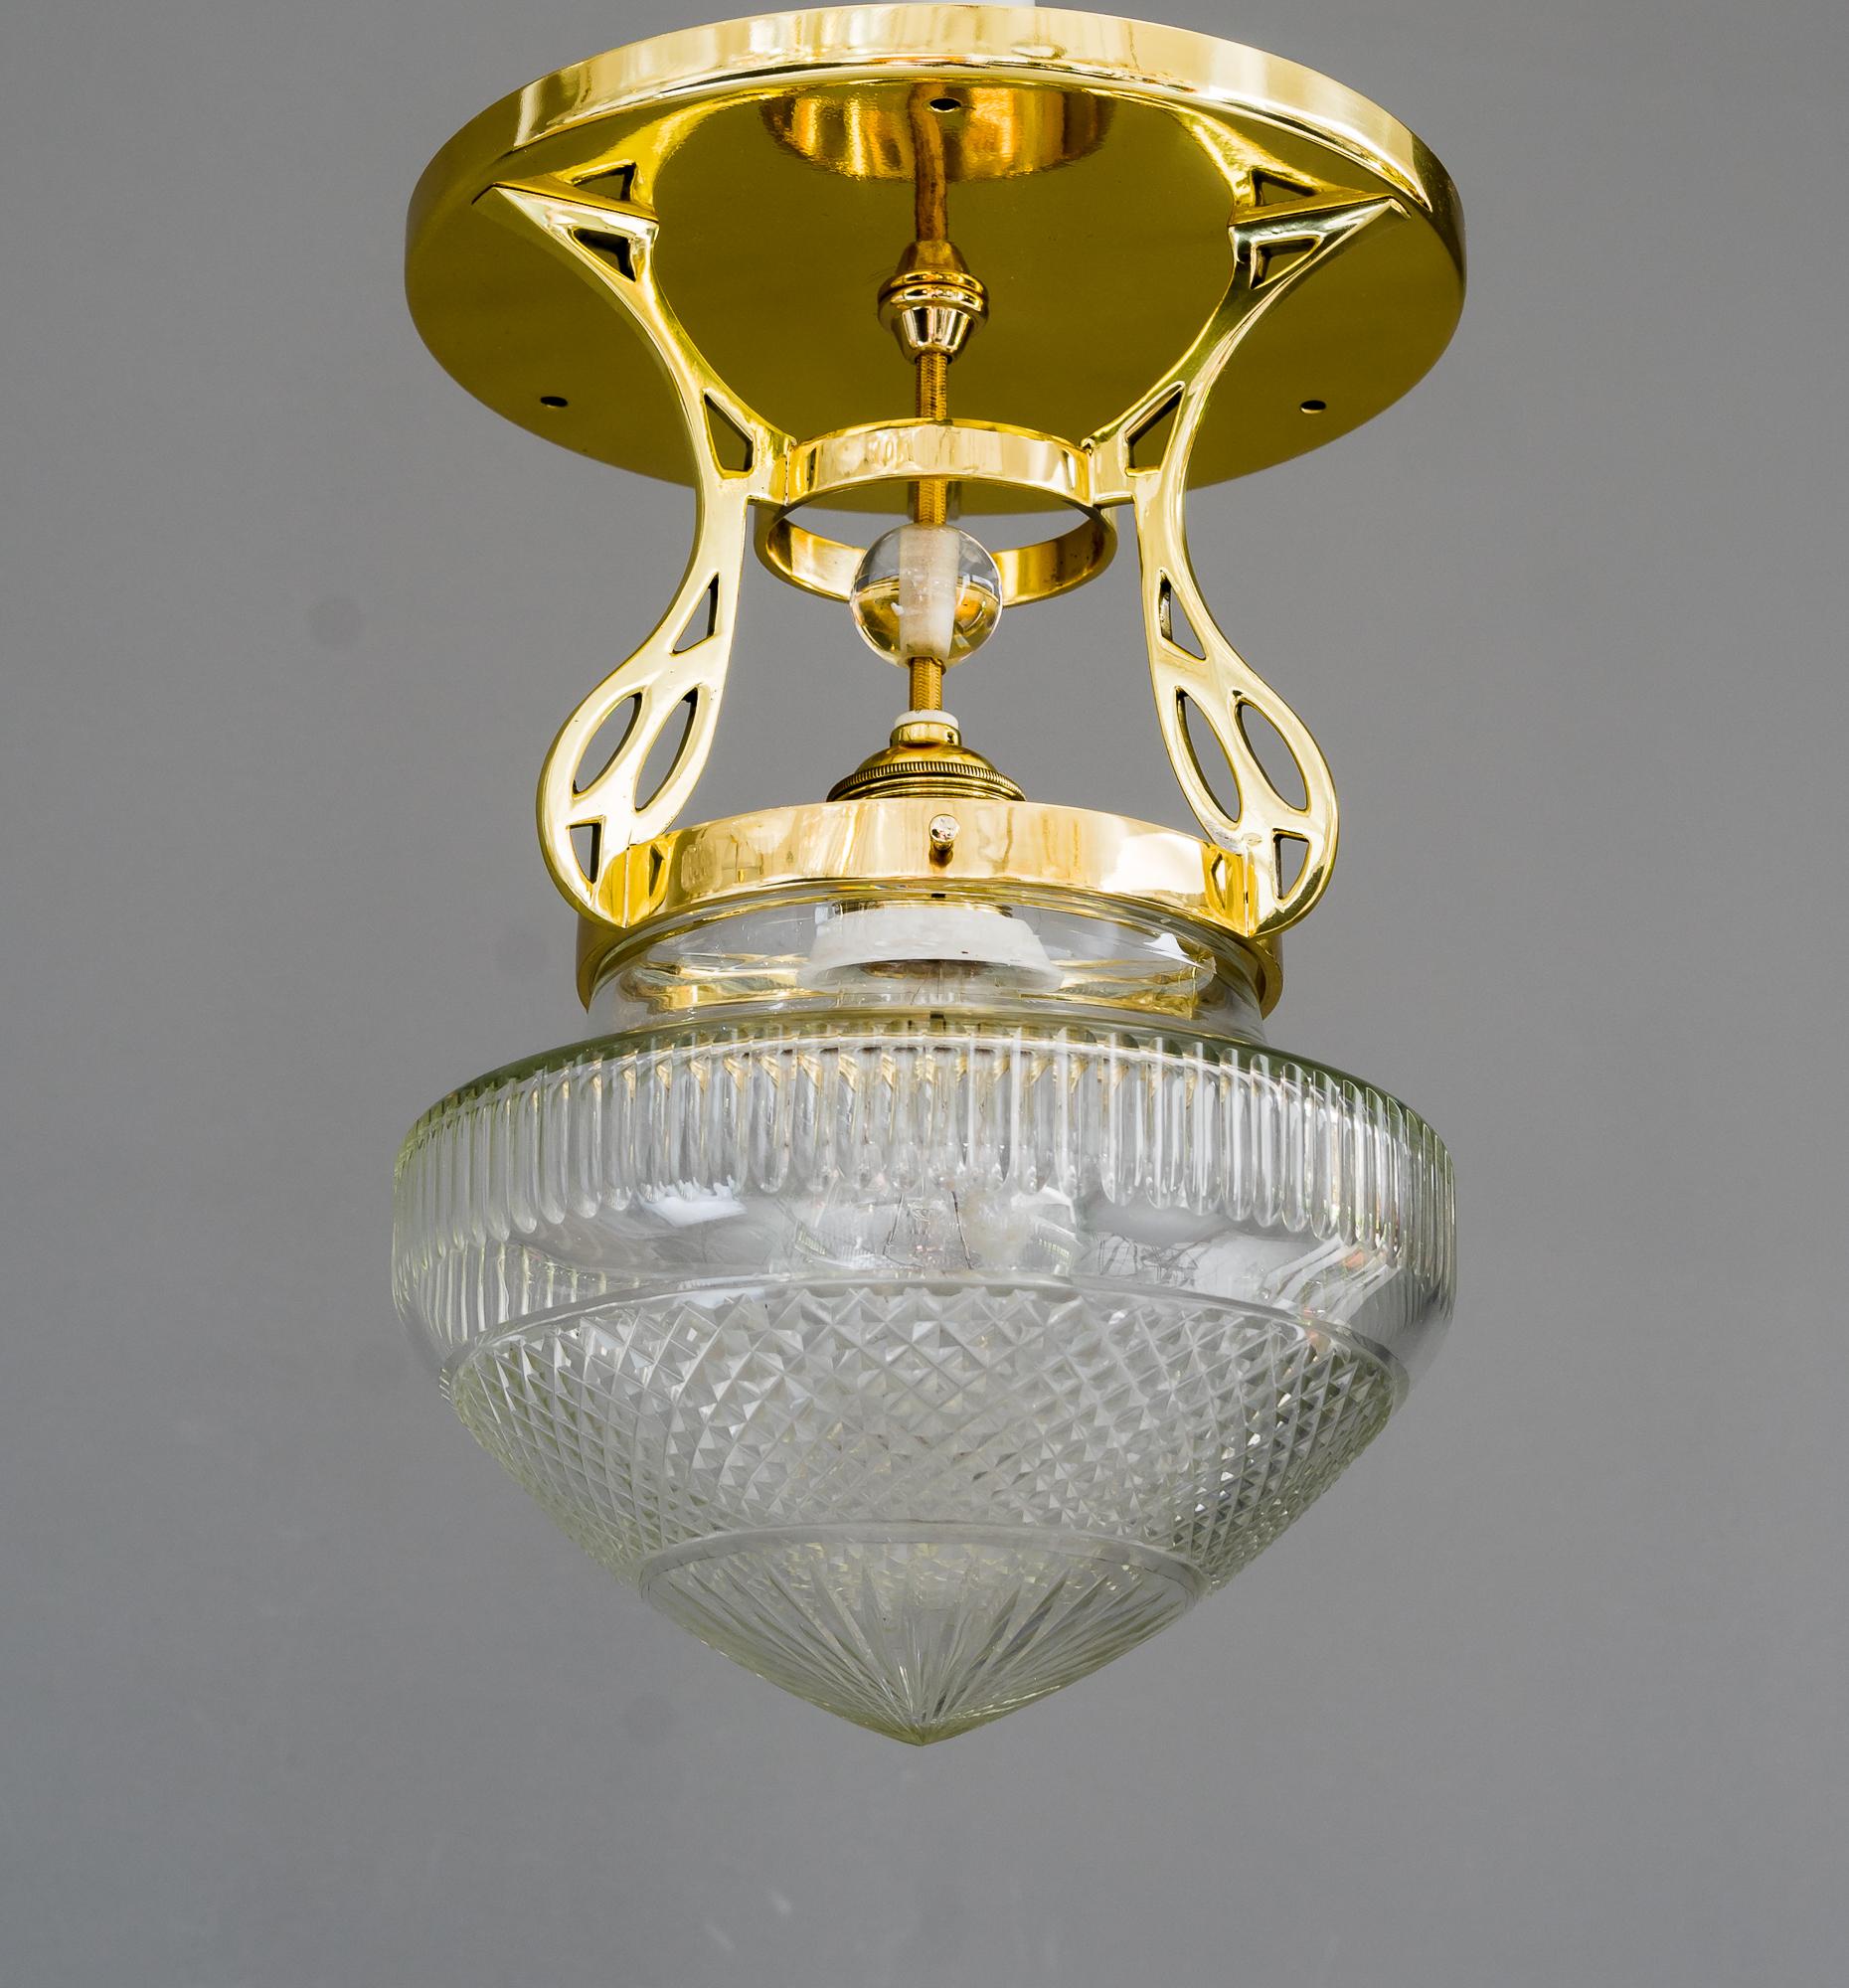 Art Deco ceiling lamp, Vienna around 1920s
Brass polished and stove enamelled
Original antique cut glass shade.